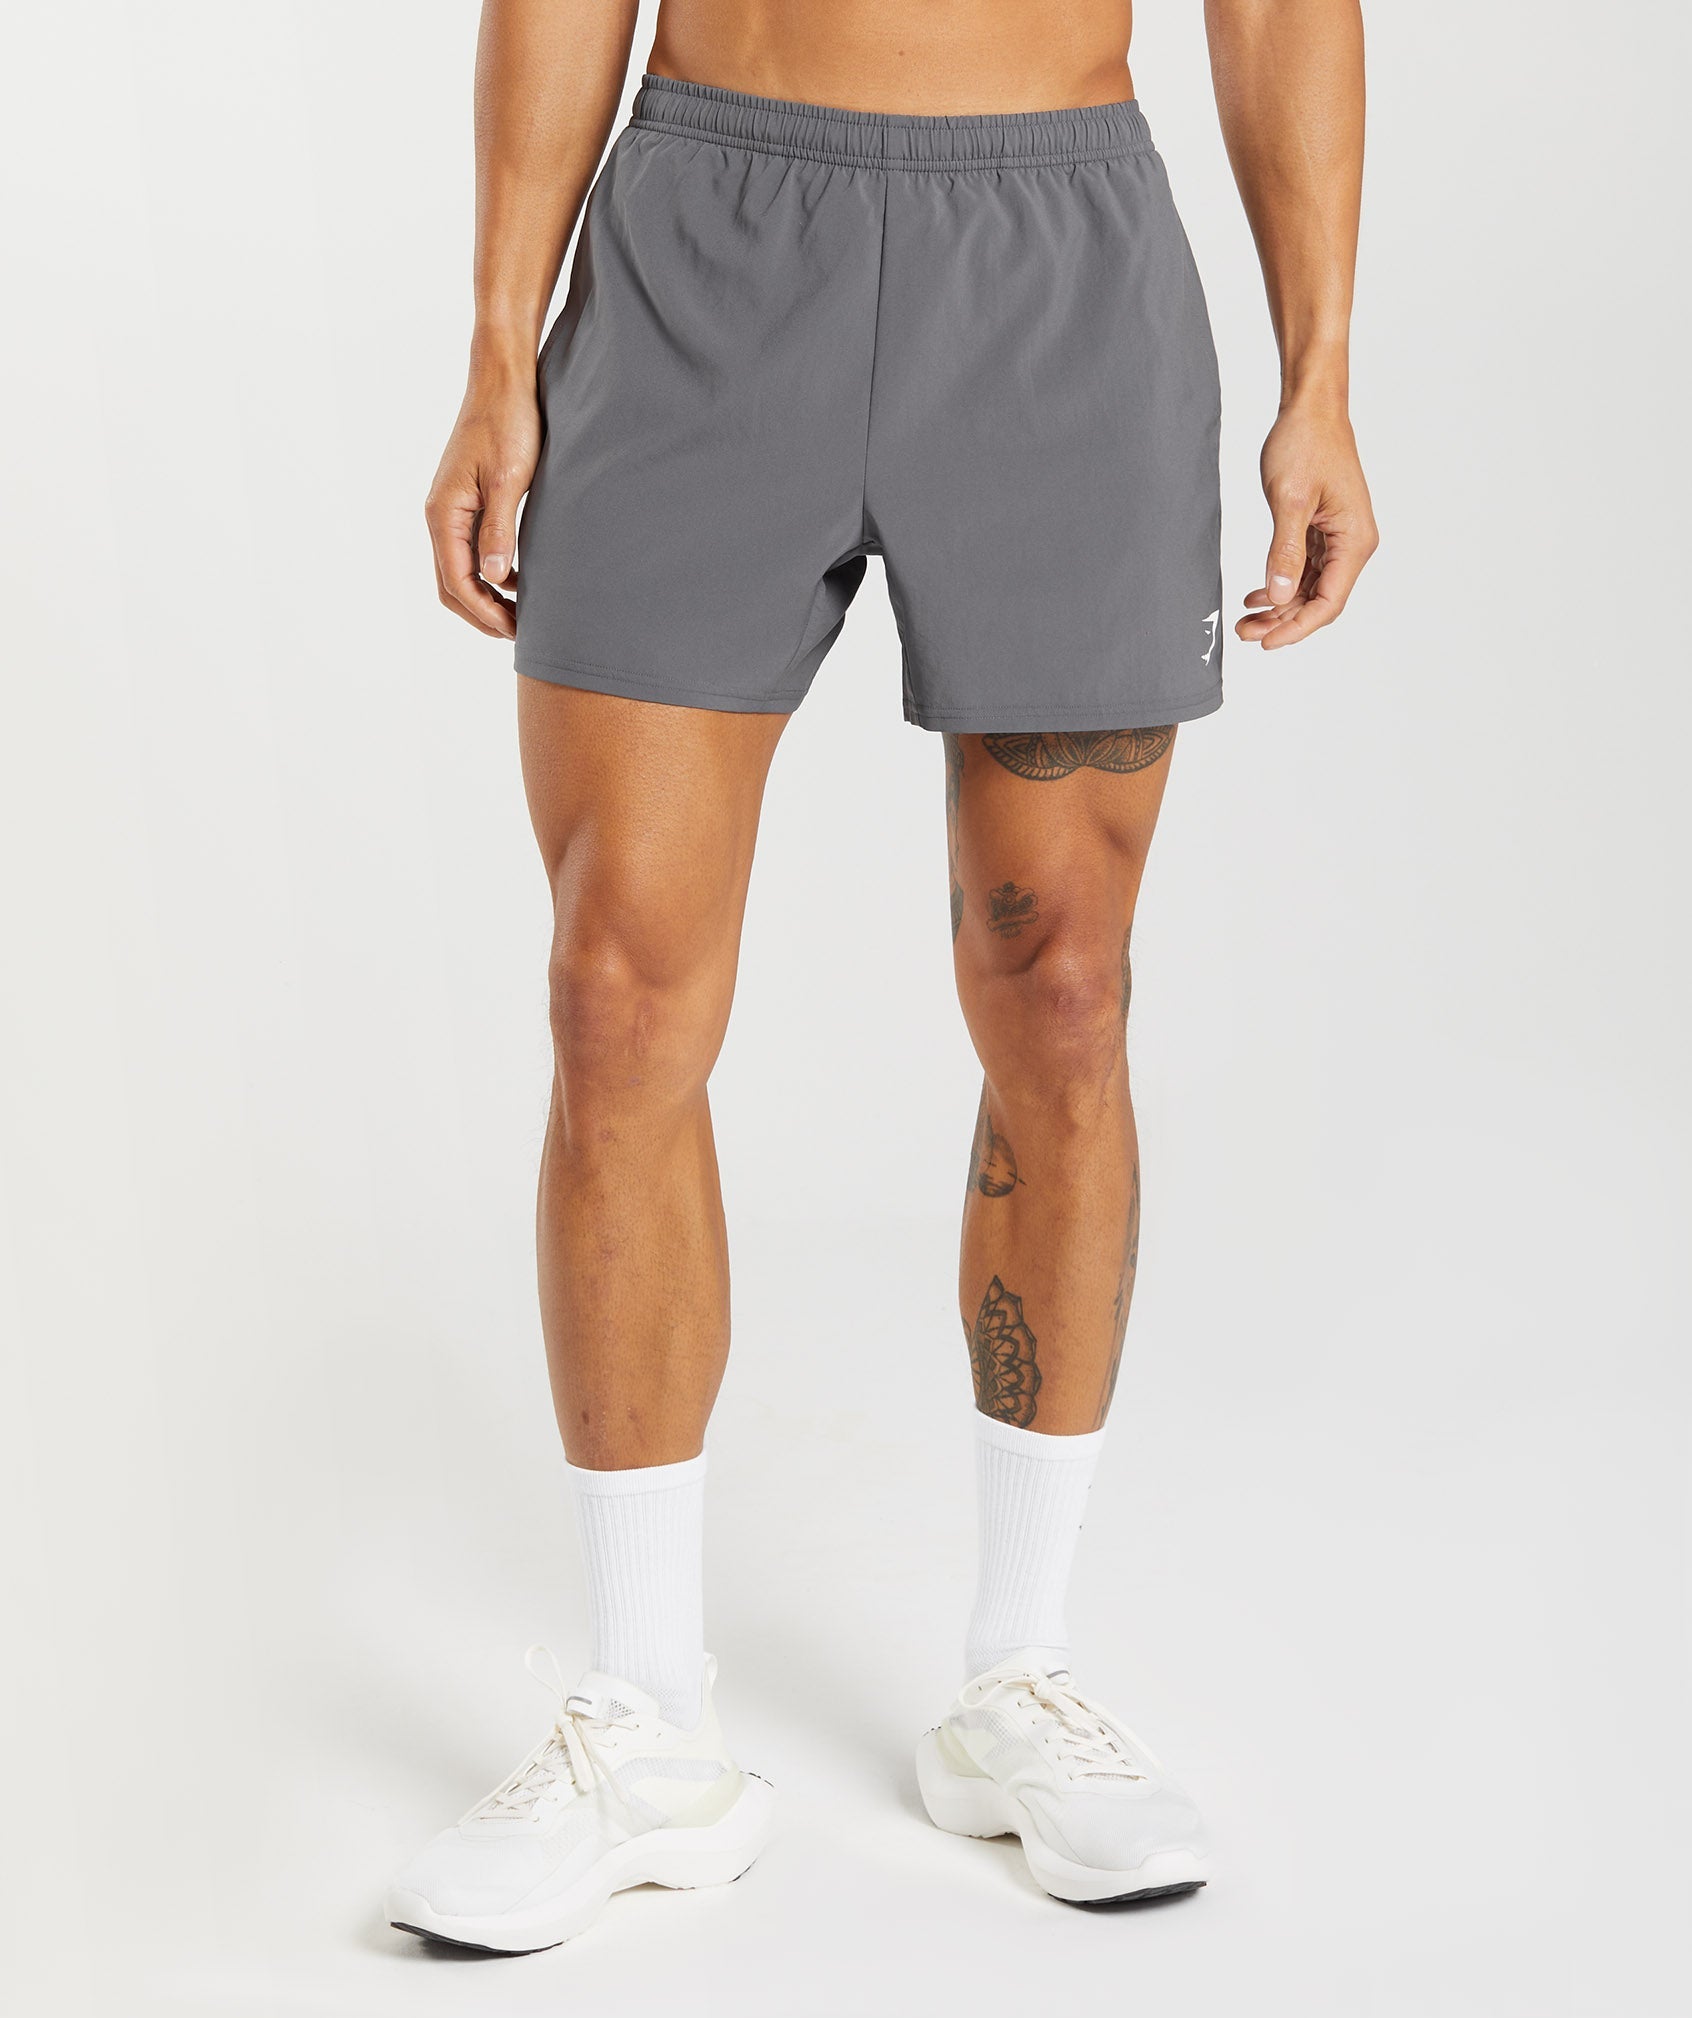 Arrival 5" Shorts in Silhouette Grey